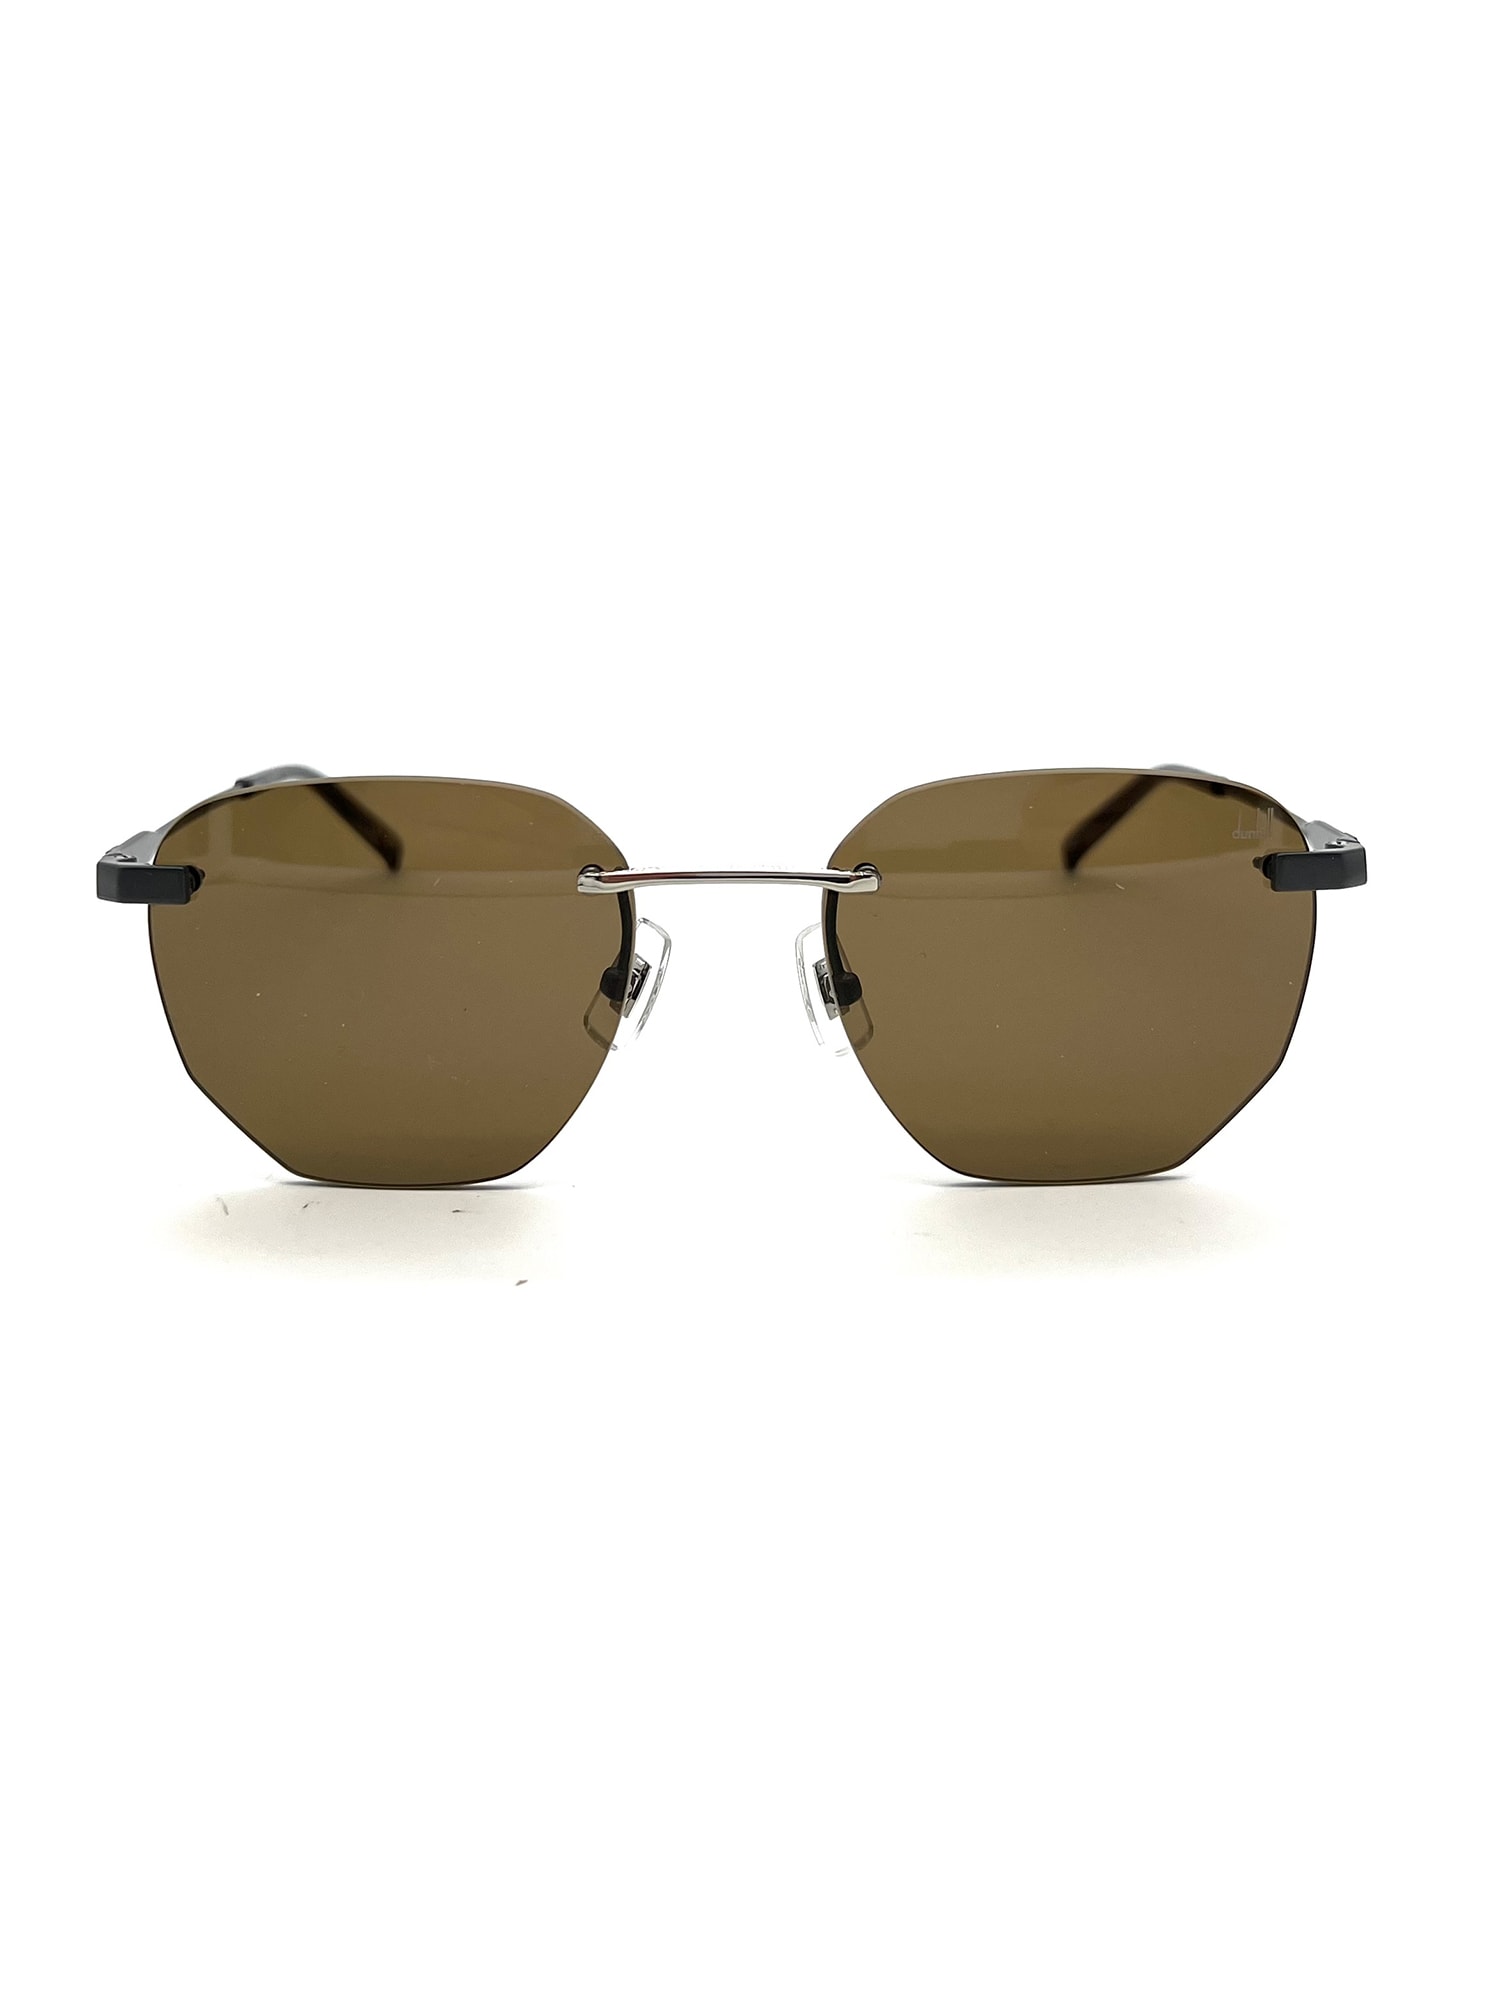 Dunhill Du0066s Sunglasses In Grey Grey Brown